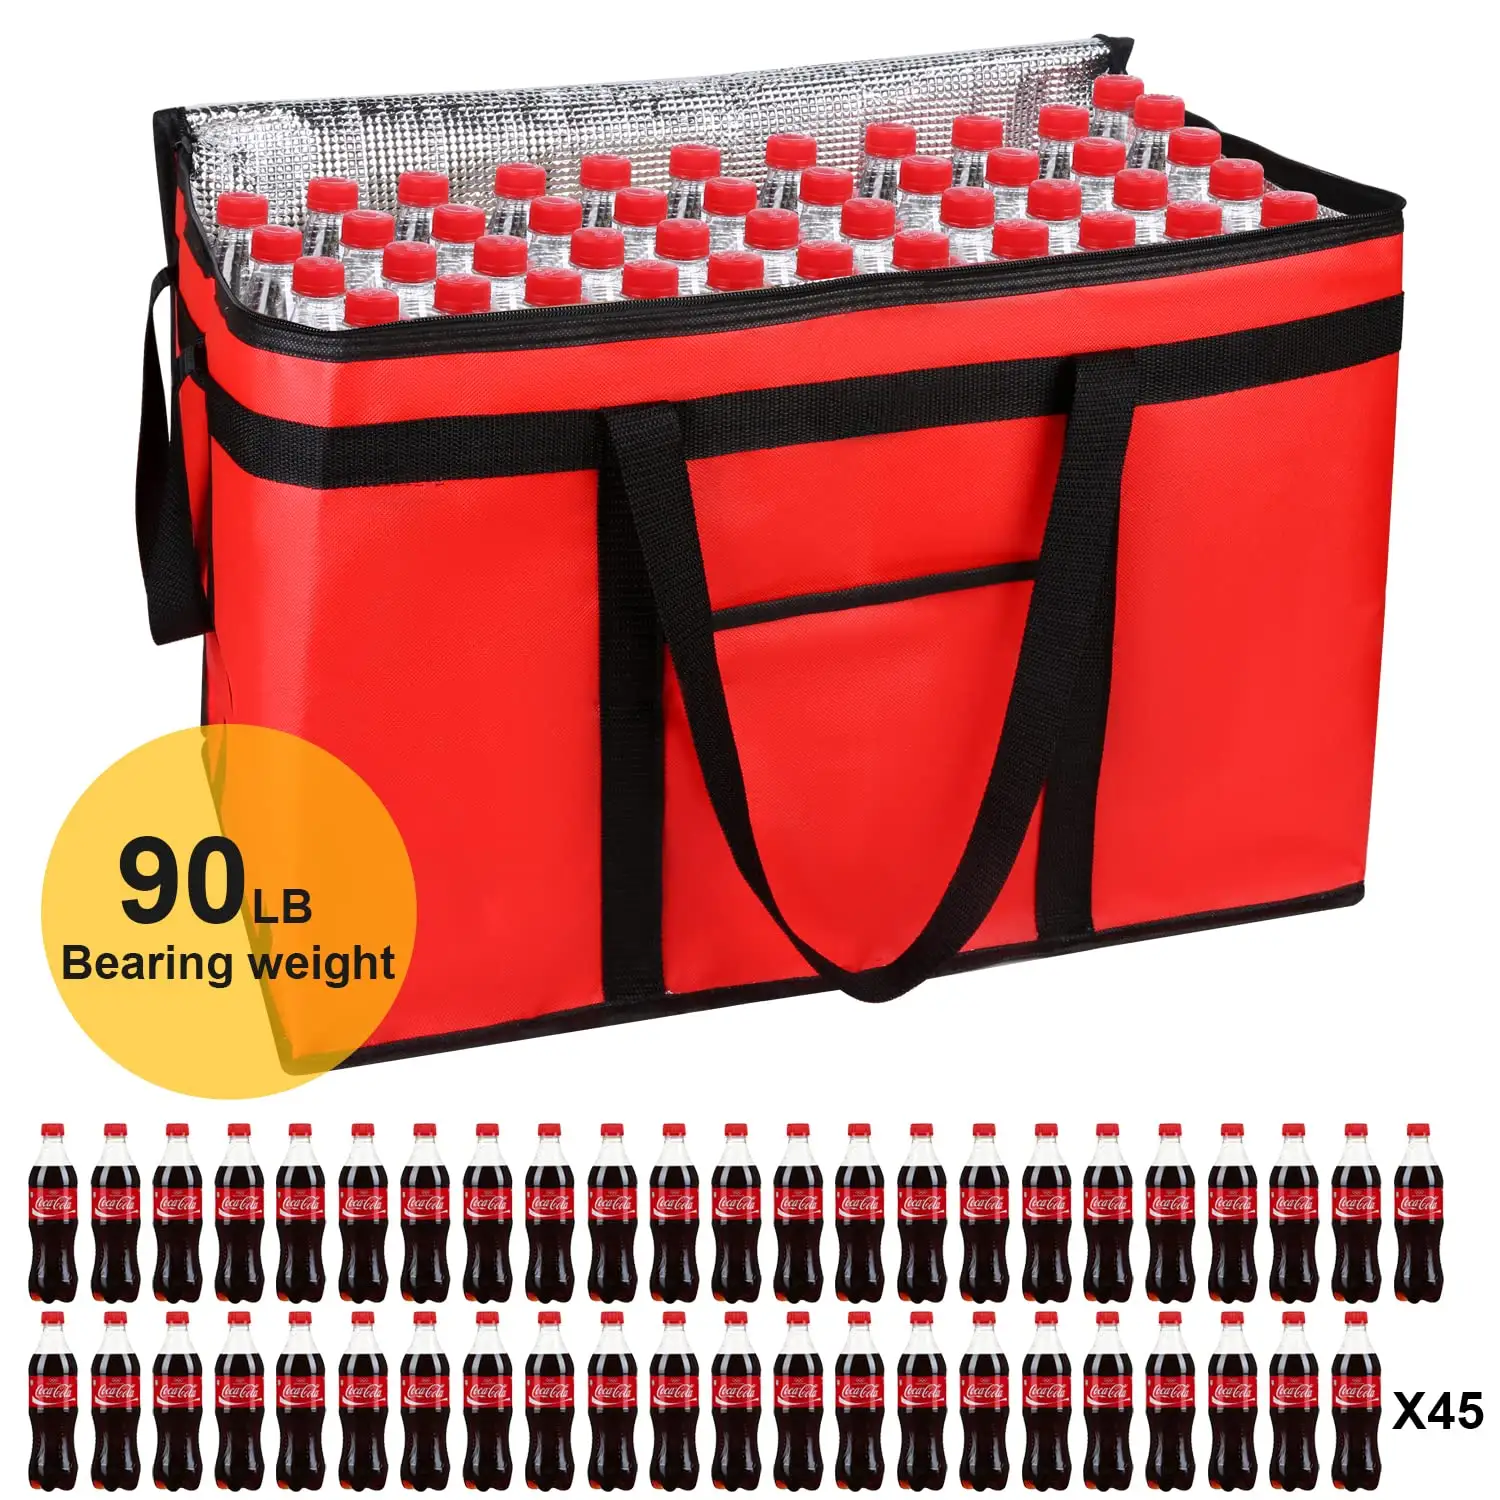 Reusable Waterproof Thermal Insulated Cooler Bag Grocery Cool Portable Carry Non Woven Lunch Cooler Bag for Food